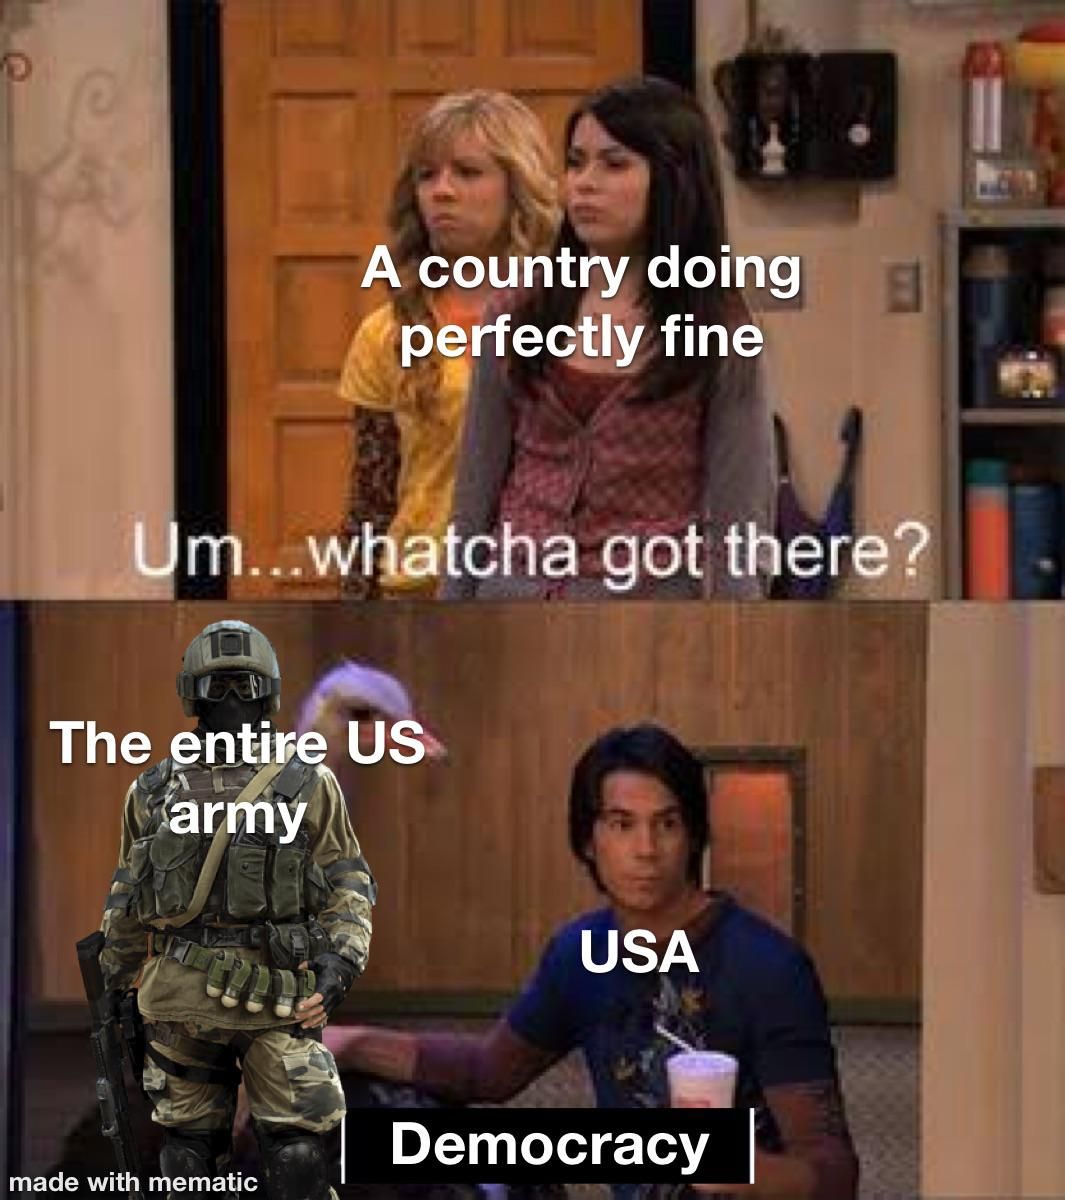 How many times have the US invaded random countries they have nothing to do with?